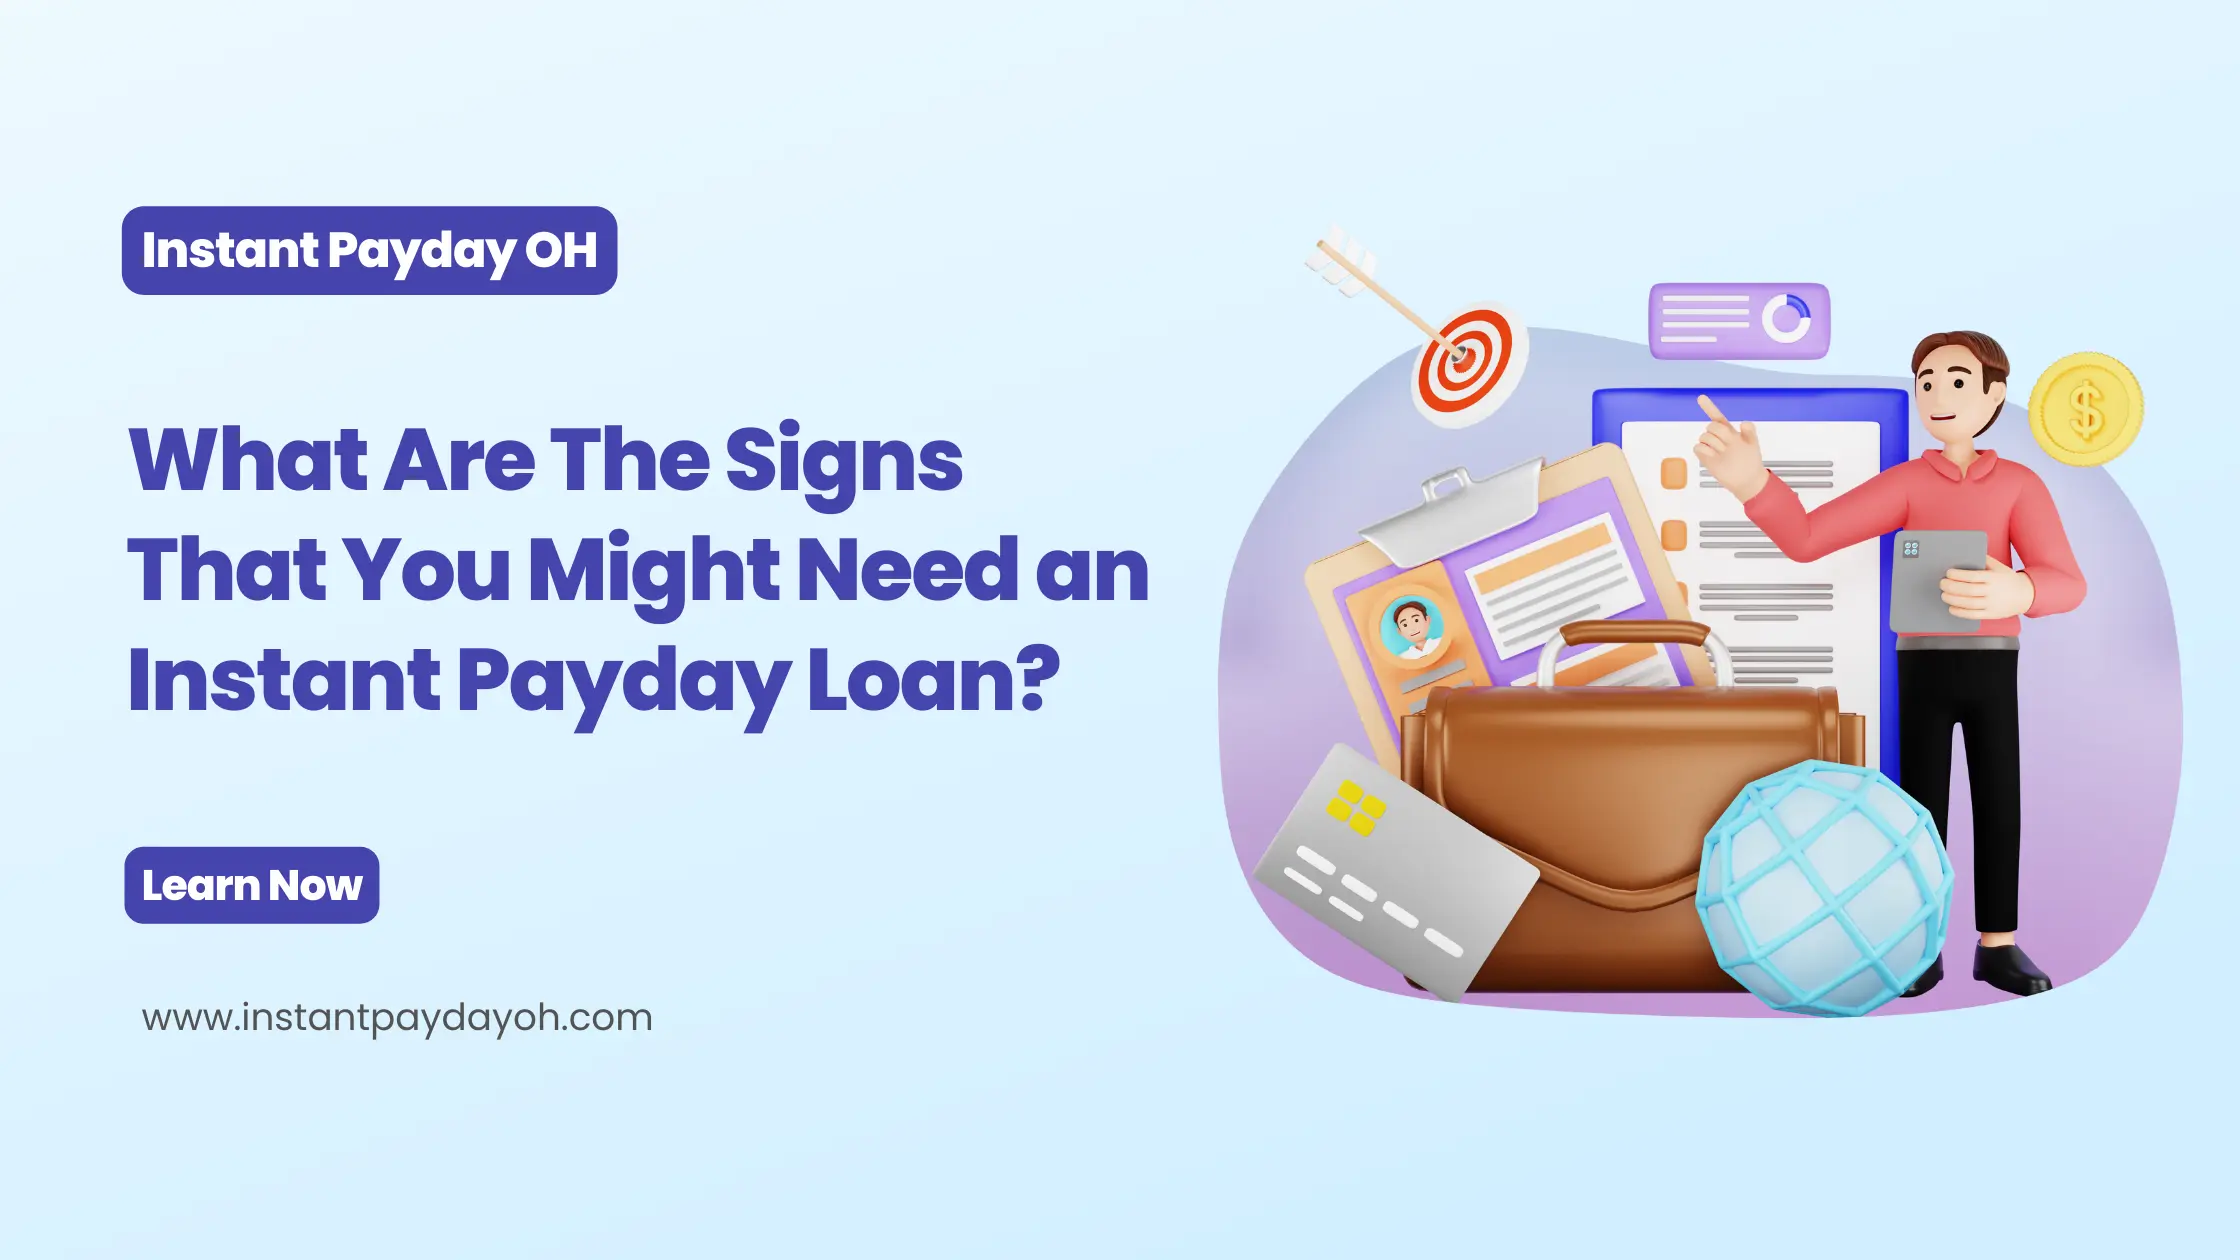 What Are The Signs That You Might Need an Instant Payday Loan